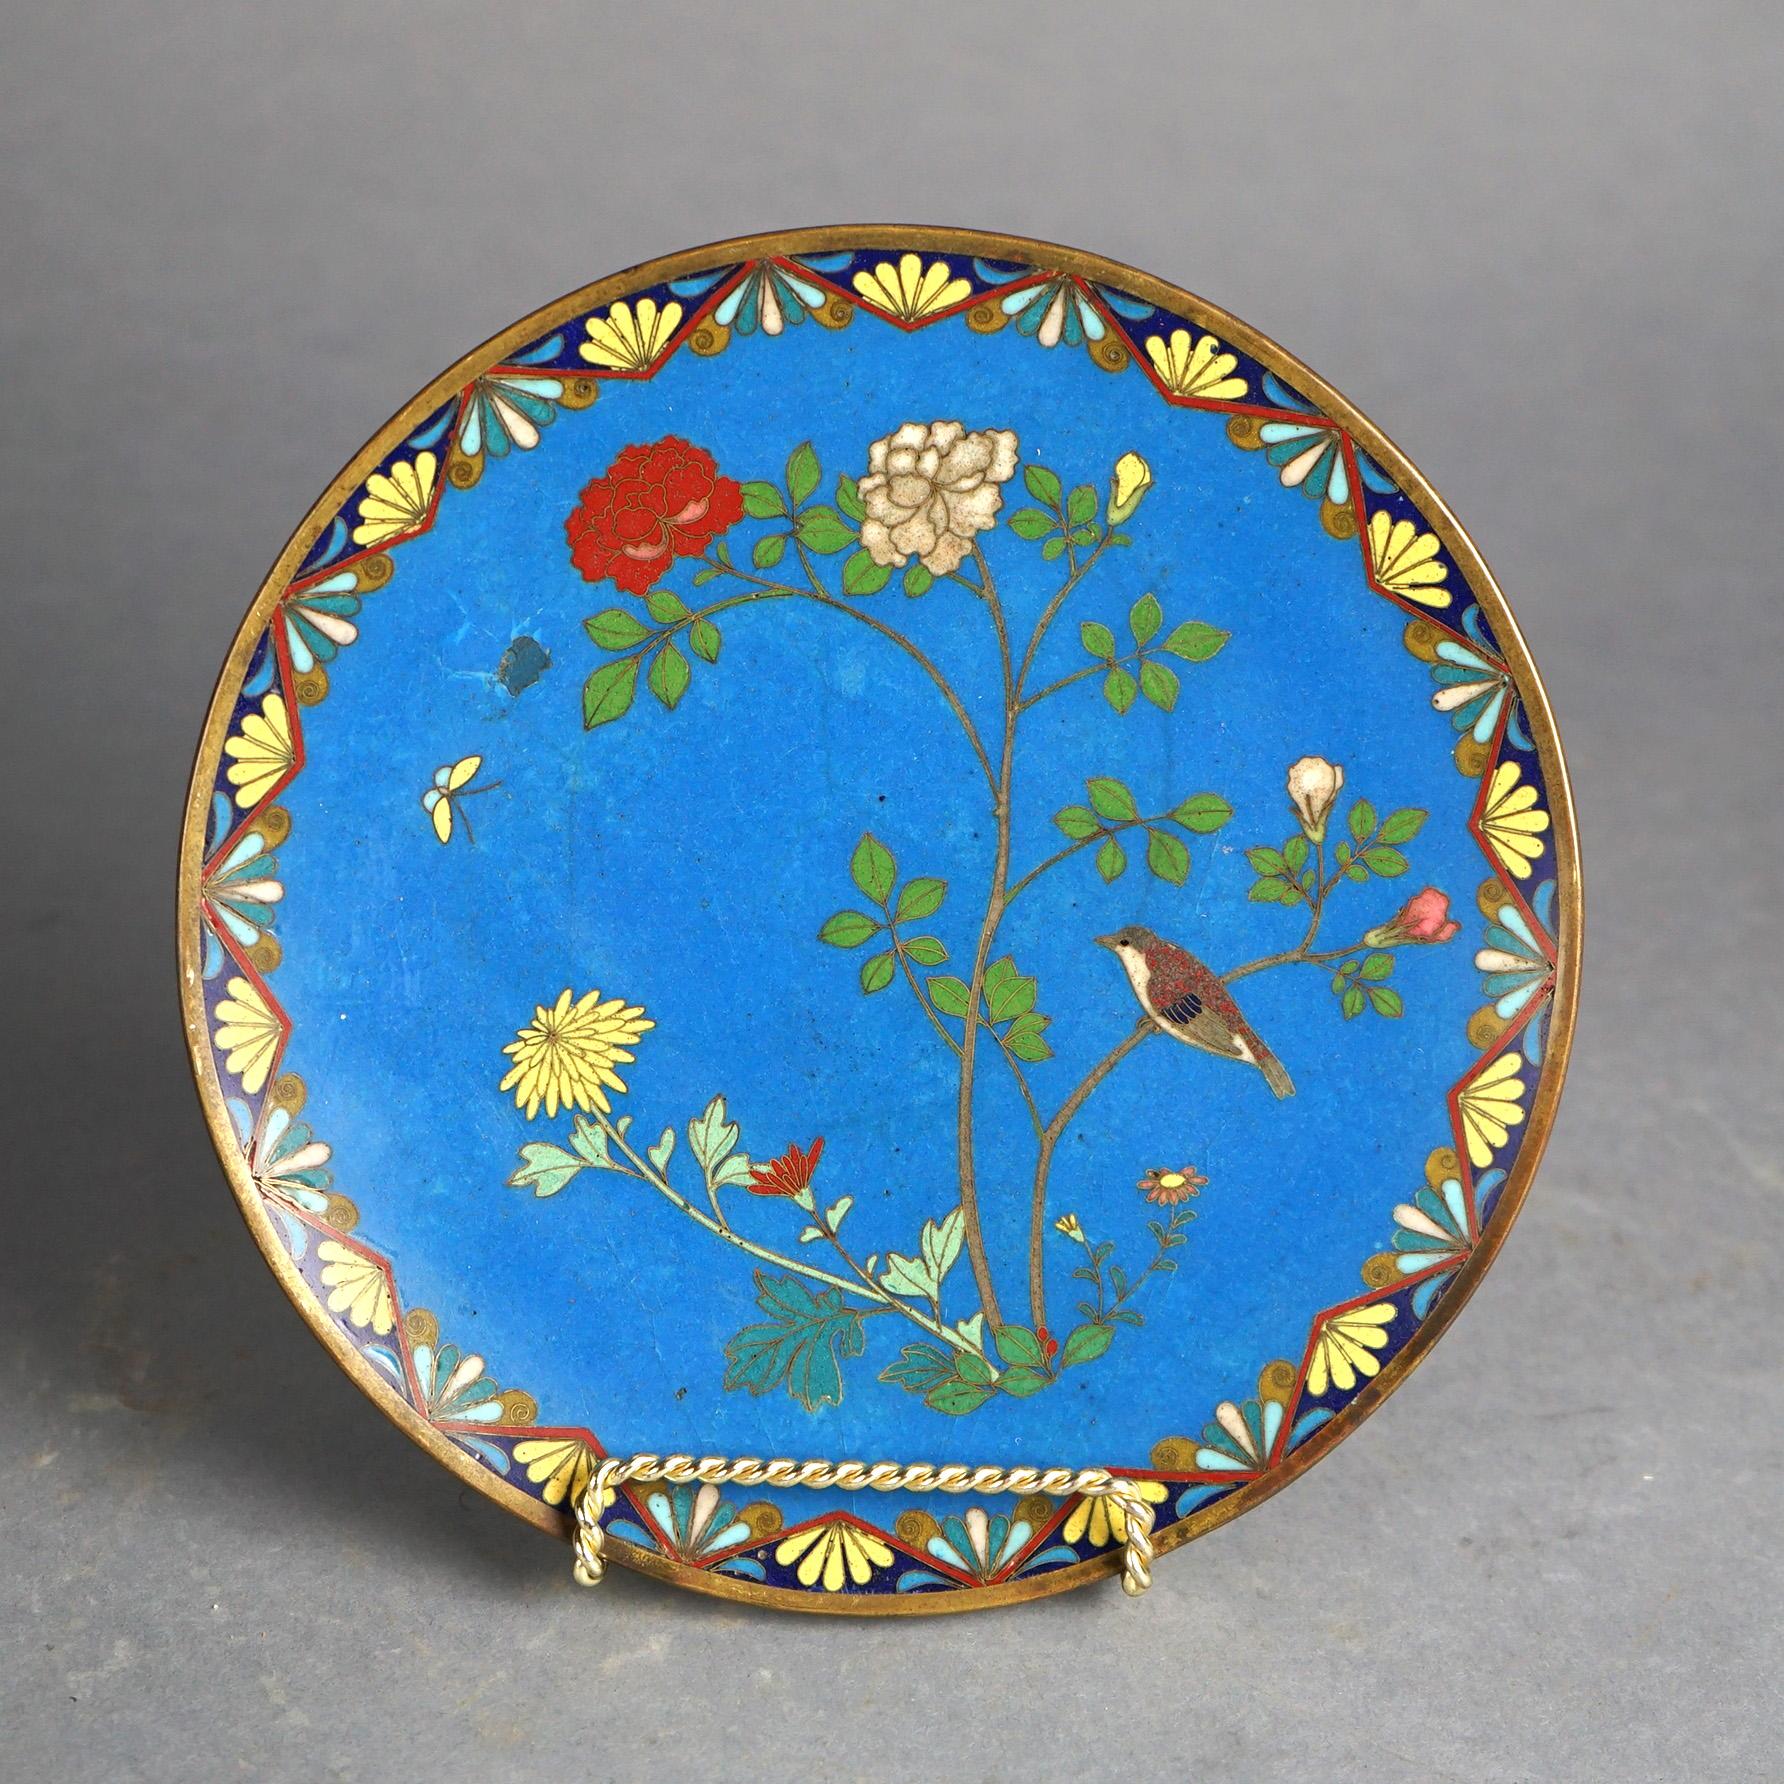 Antique Japanese Meiji Cloisonné Enameled Charger with Garden Flowers, Butterfly & Bird C1920

Measures - 12.25